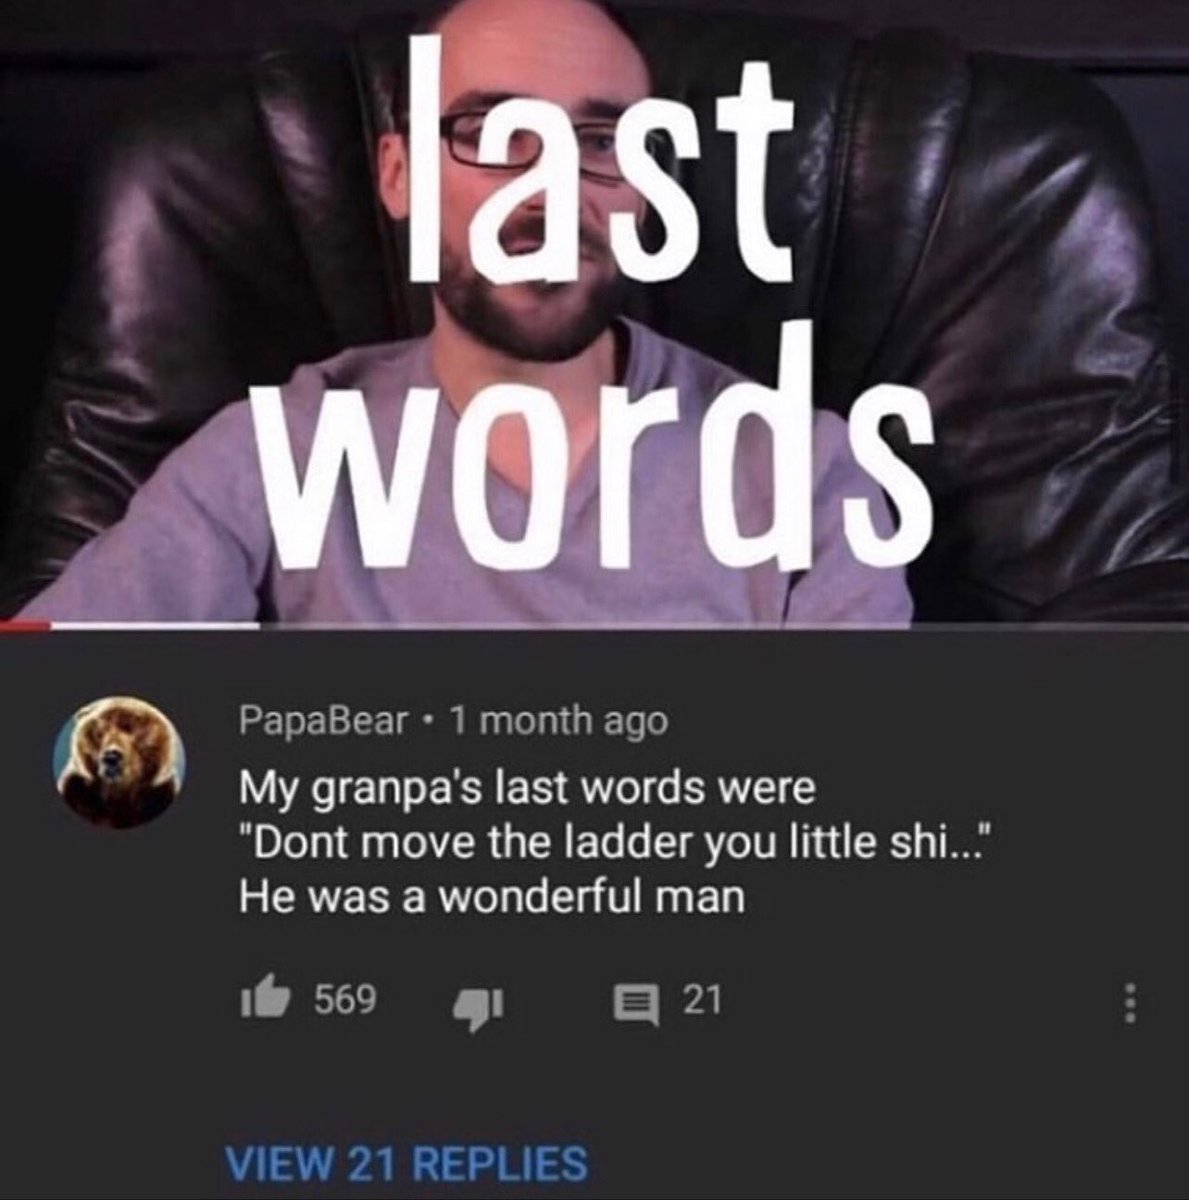 insane youtube comments - photo caption - last words PapaBear 1 month ago My granpa's last words were "Dont move the ladder you little shi..." He was a wonderful man 1569 View 21 Replies 21